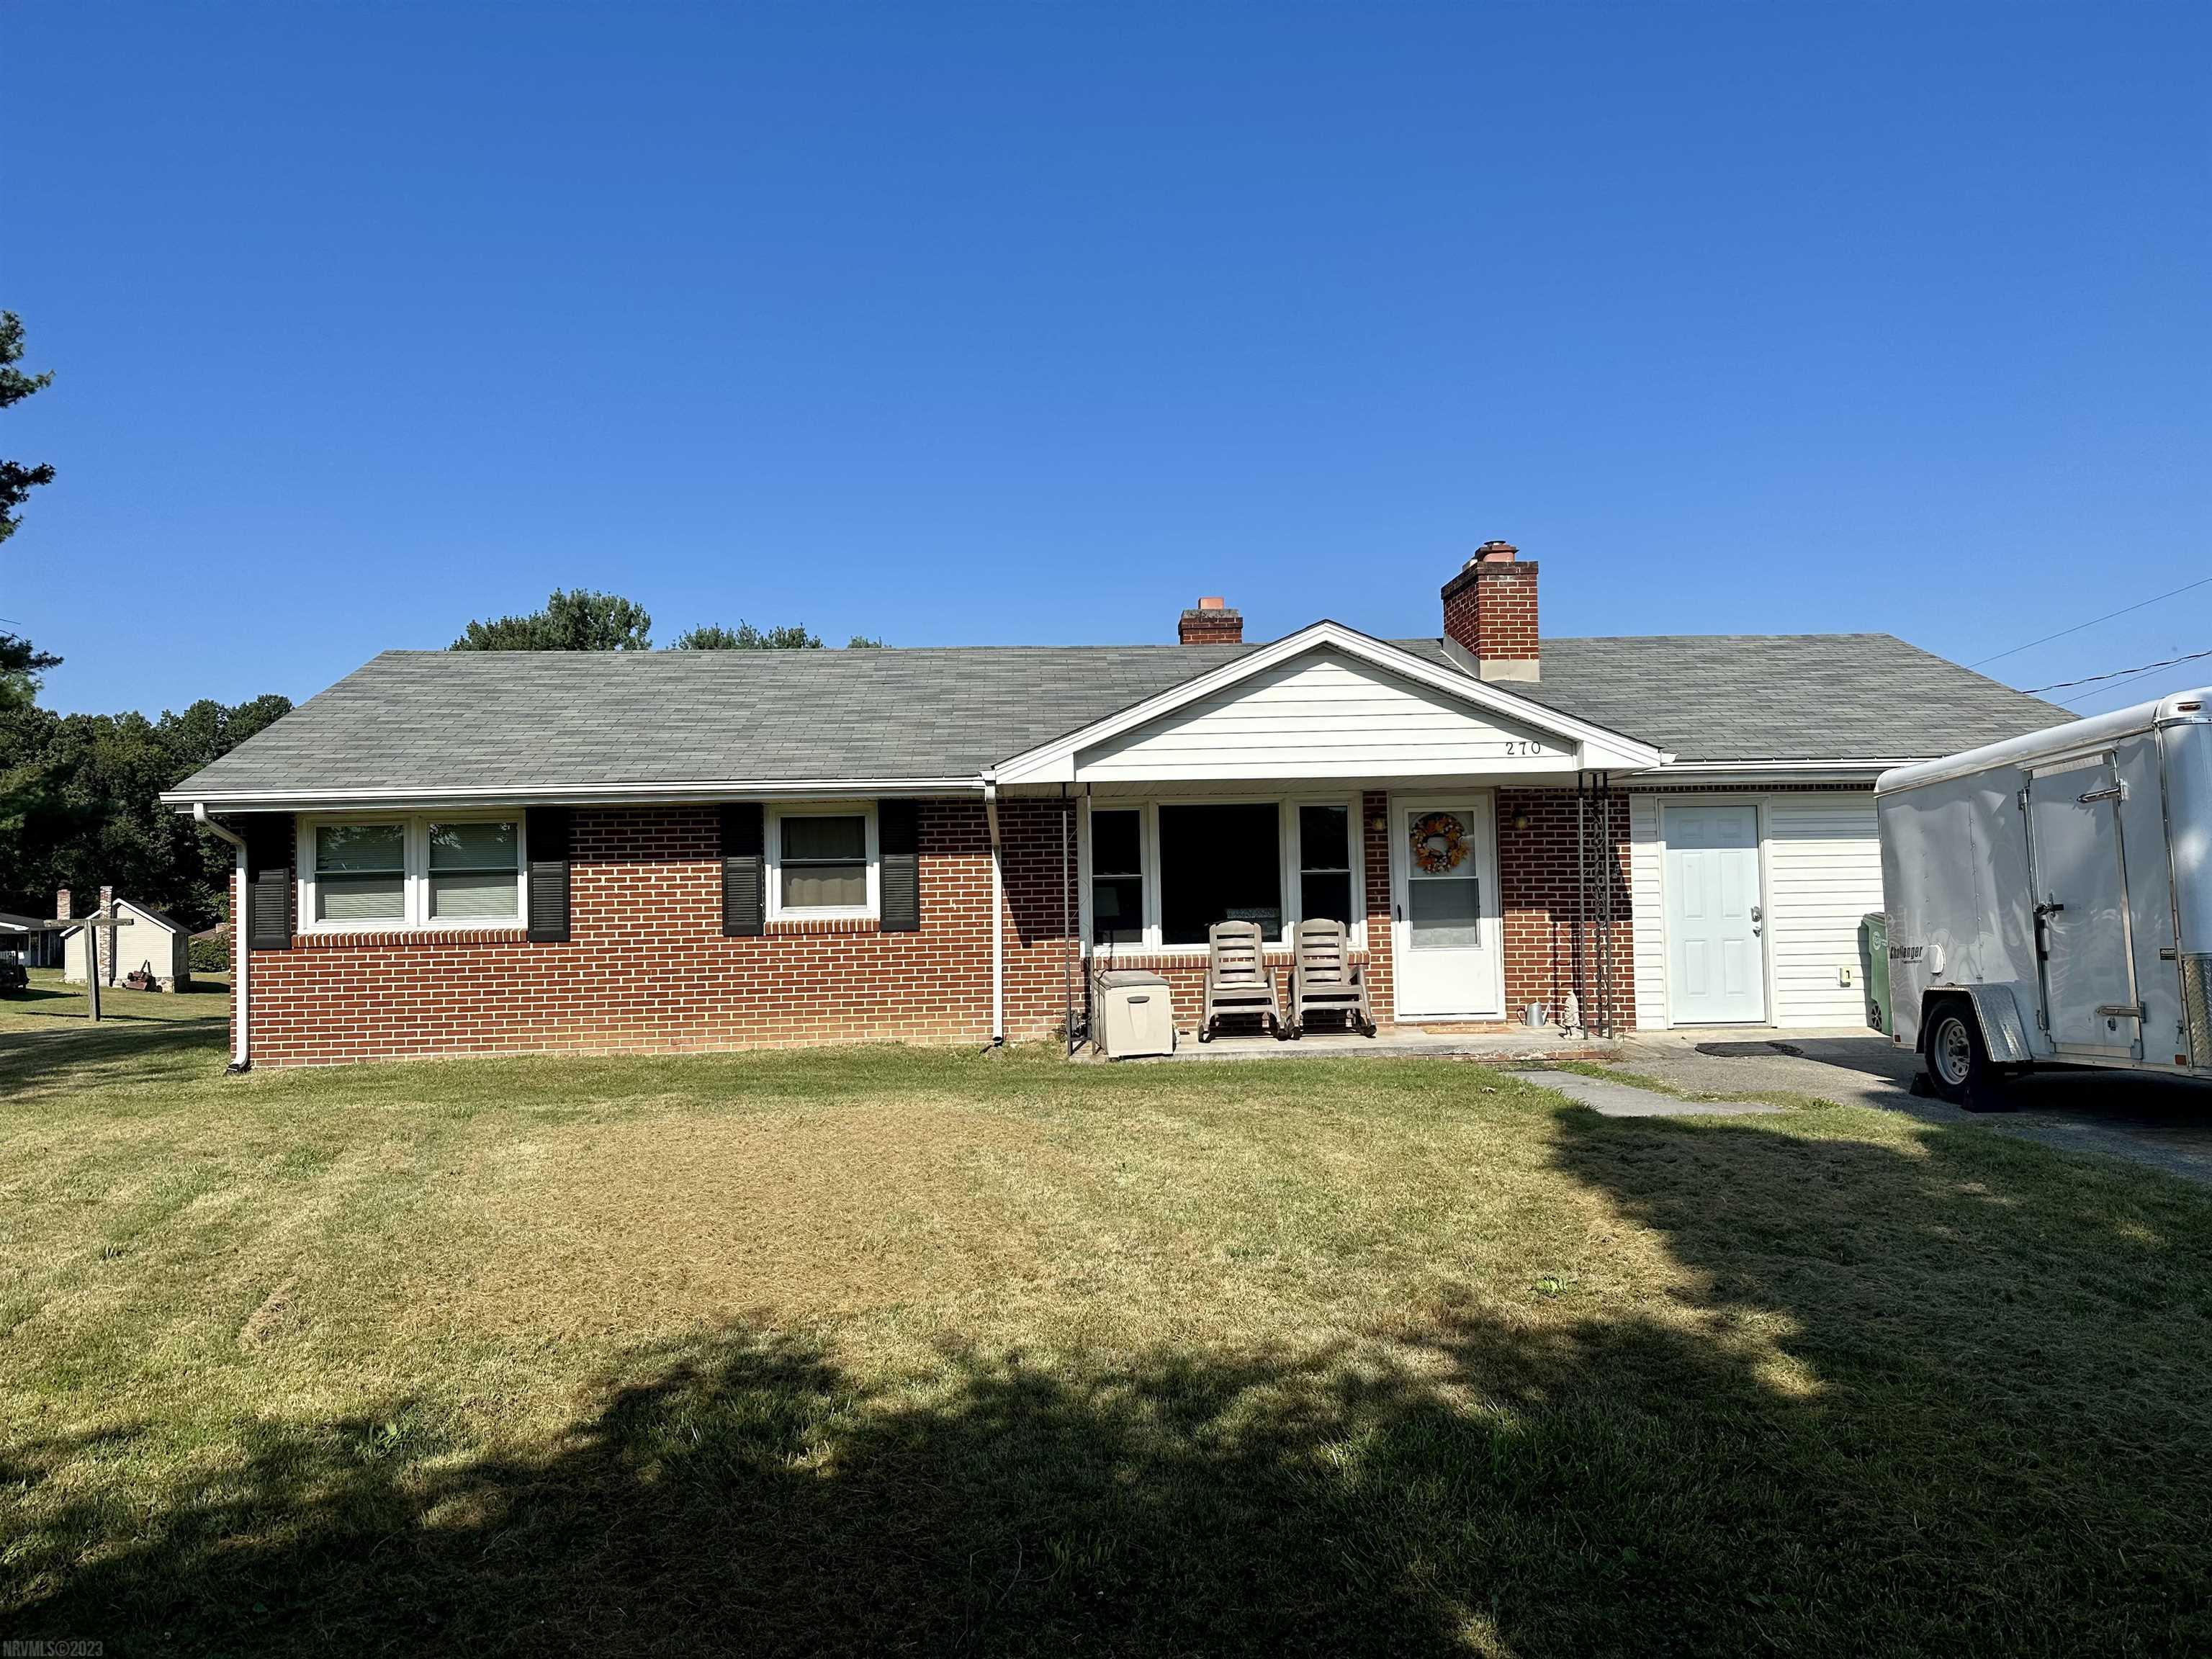 Welcome to 270 Dunlap Drive. Sitting in this quiet, rural setting is a beautiful brick ranch with quick access to town and highways for traveling. Enough room for the entire family featuring three bedrooms and a cozy living room for watching the game. Easy one floor living and several updates makes this home a gem.